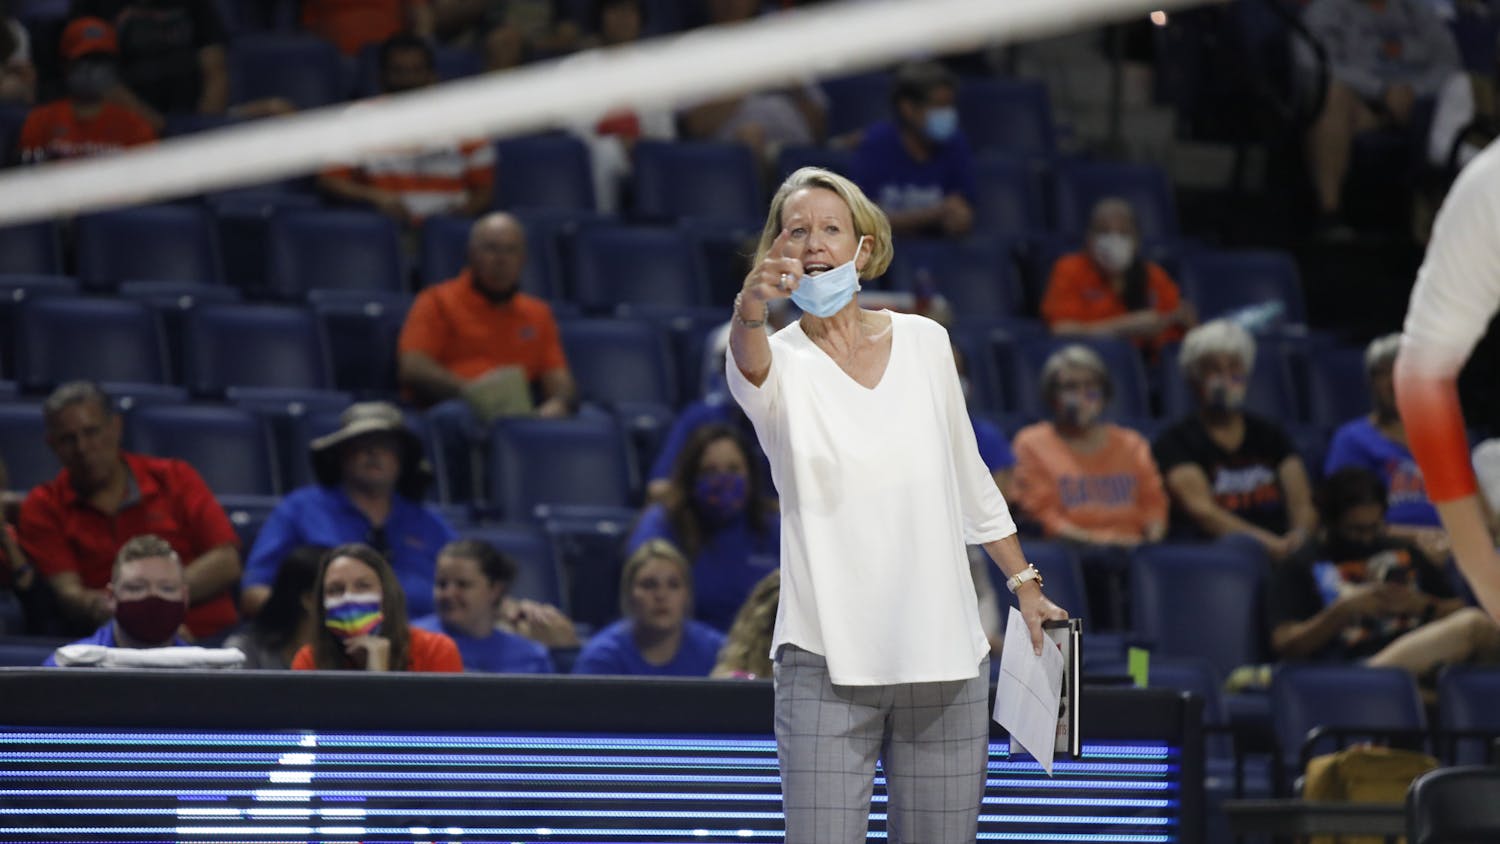 Florida head coach Mary Wise communicates with her players during a game against Mississippi State on Sept. 24.